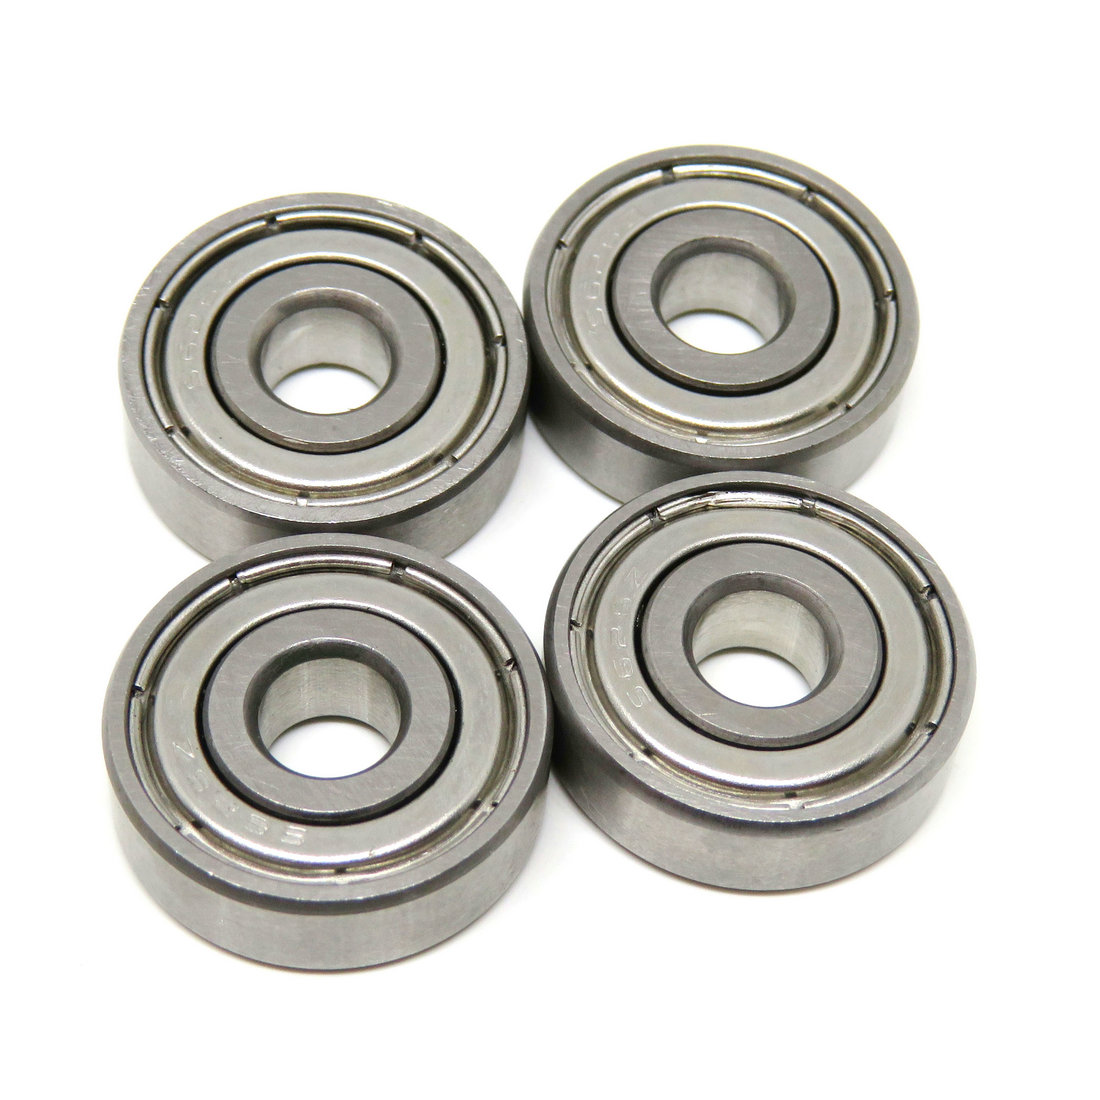 Toy Cars S625ZZ S625 2RS Stainless Steel deep Groove Ball Bearing 5x16x5mm Miniature Bearing